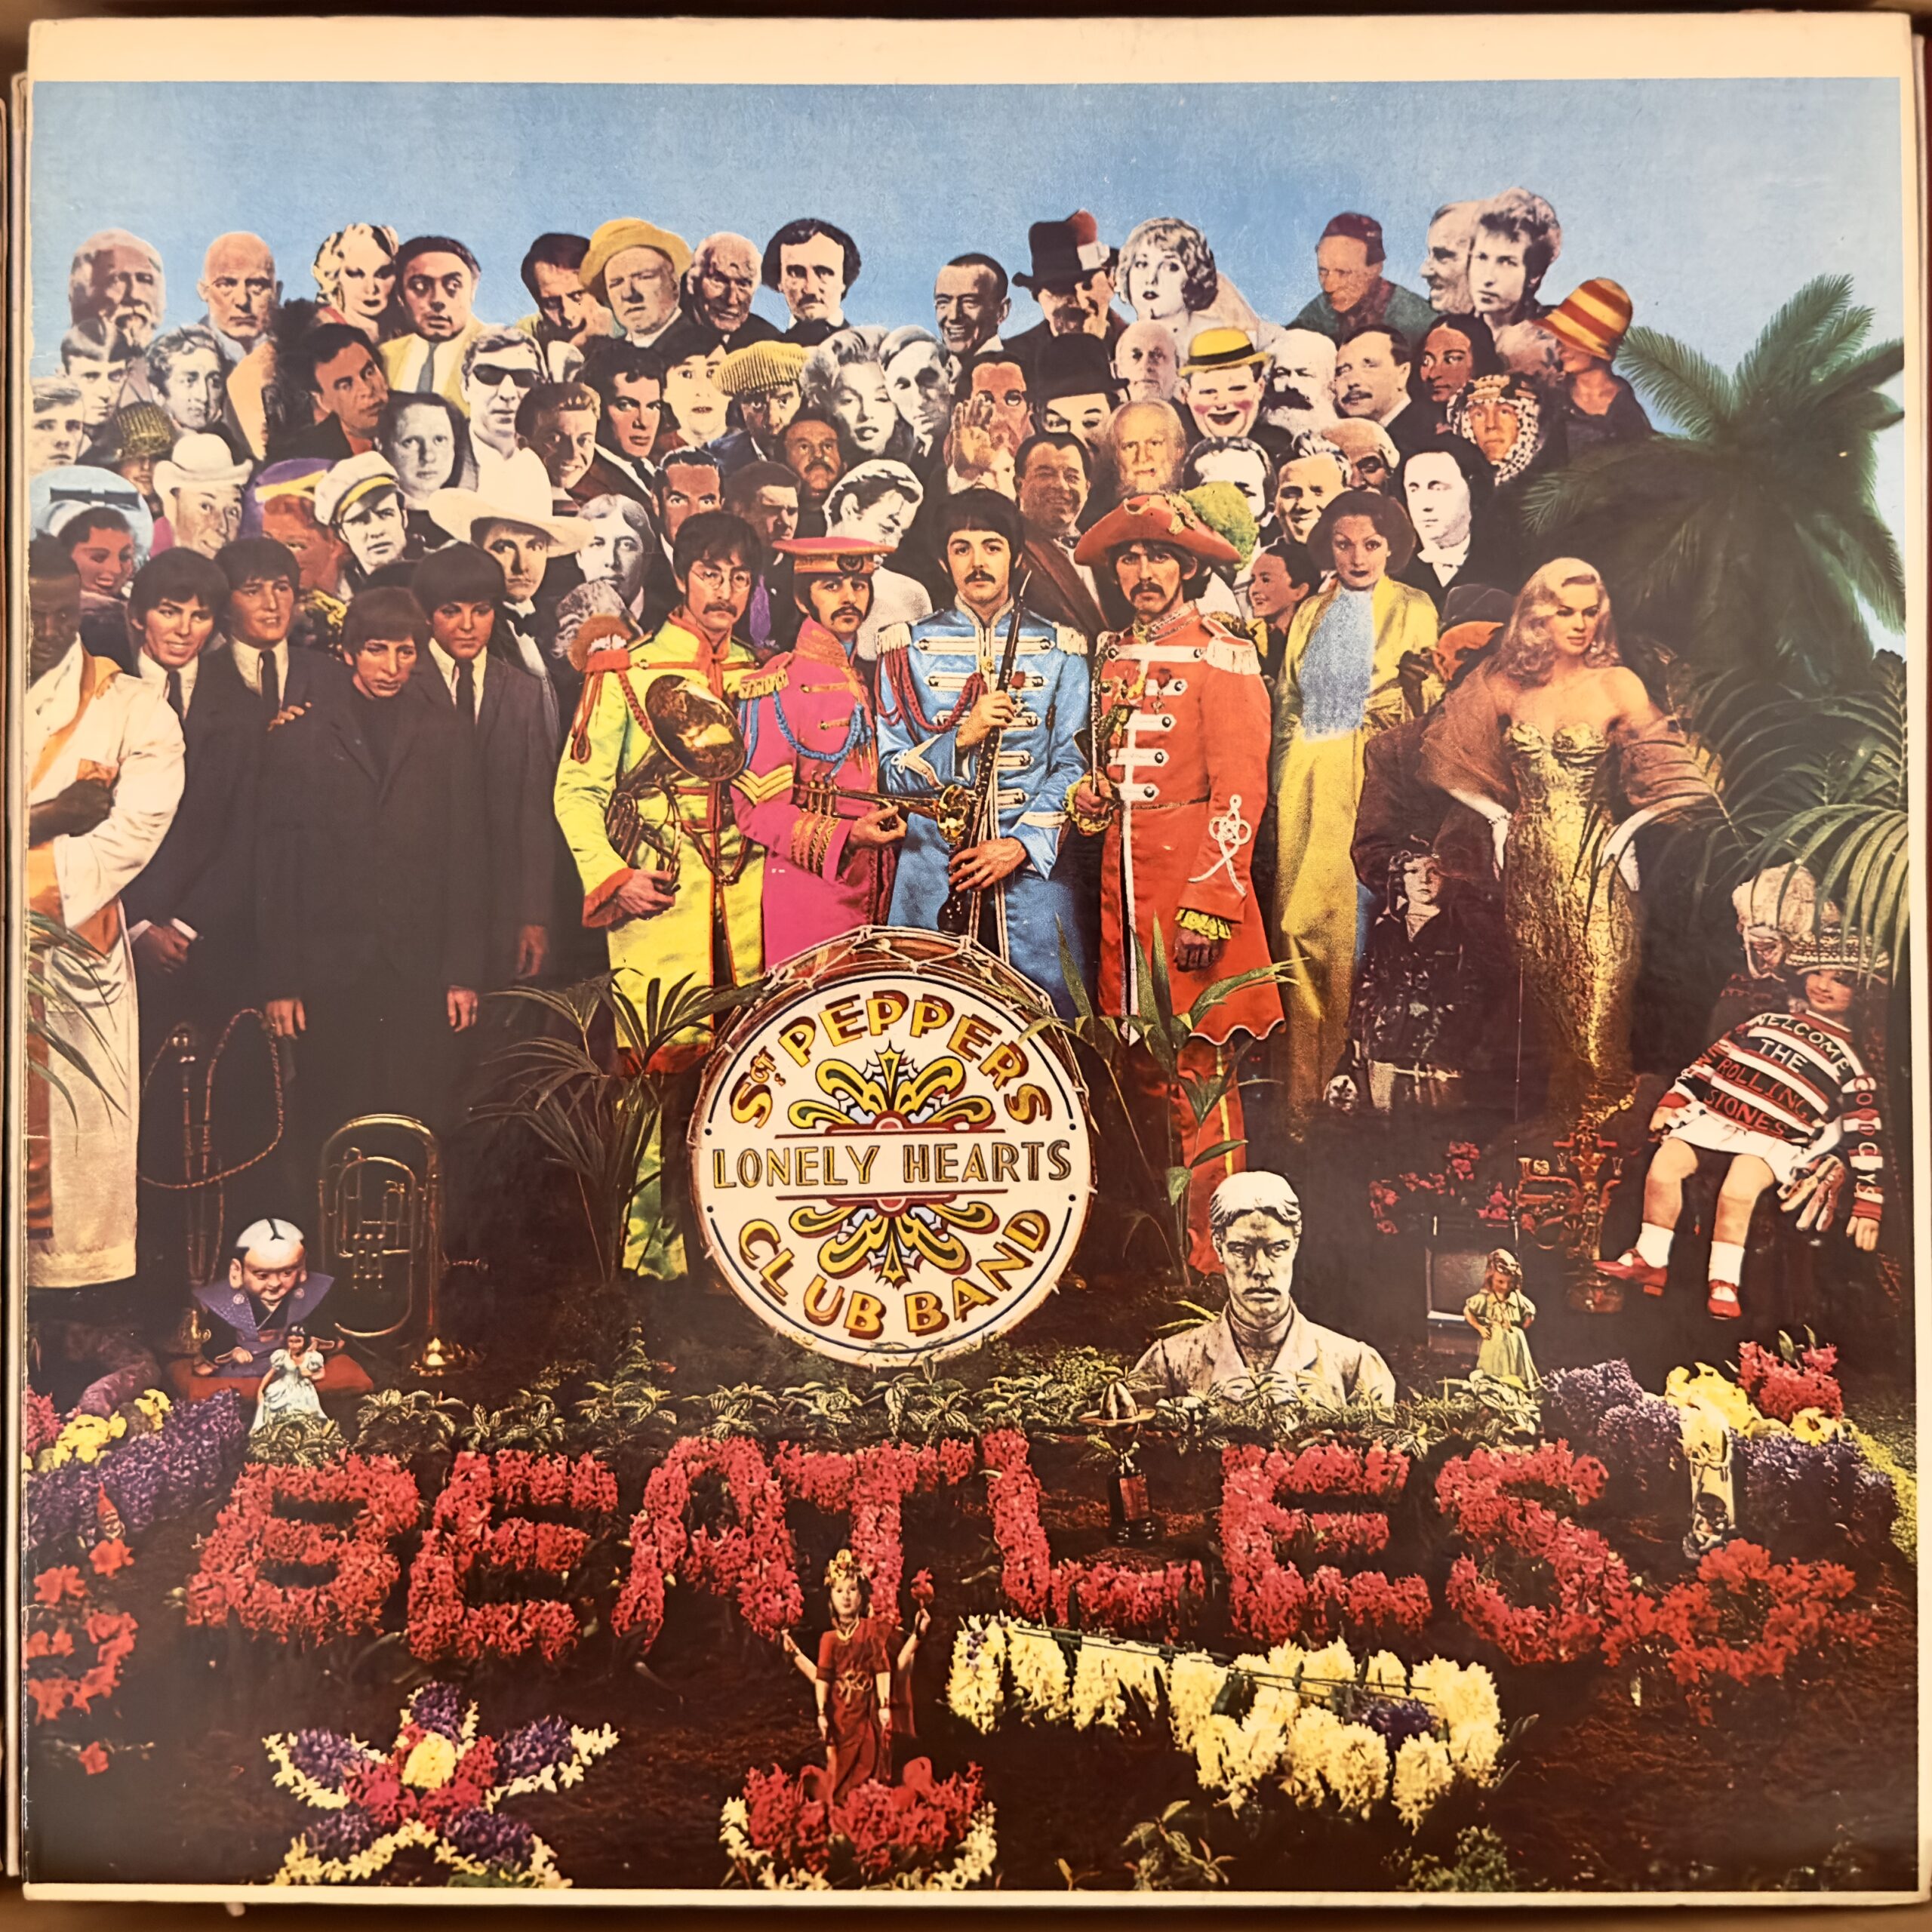 Sgt. Pepper's Lonely Hearts Club Band by the Beatles